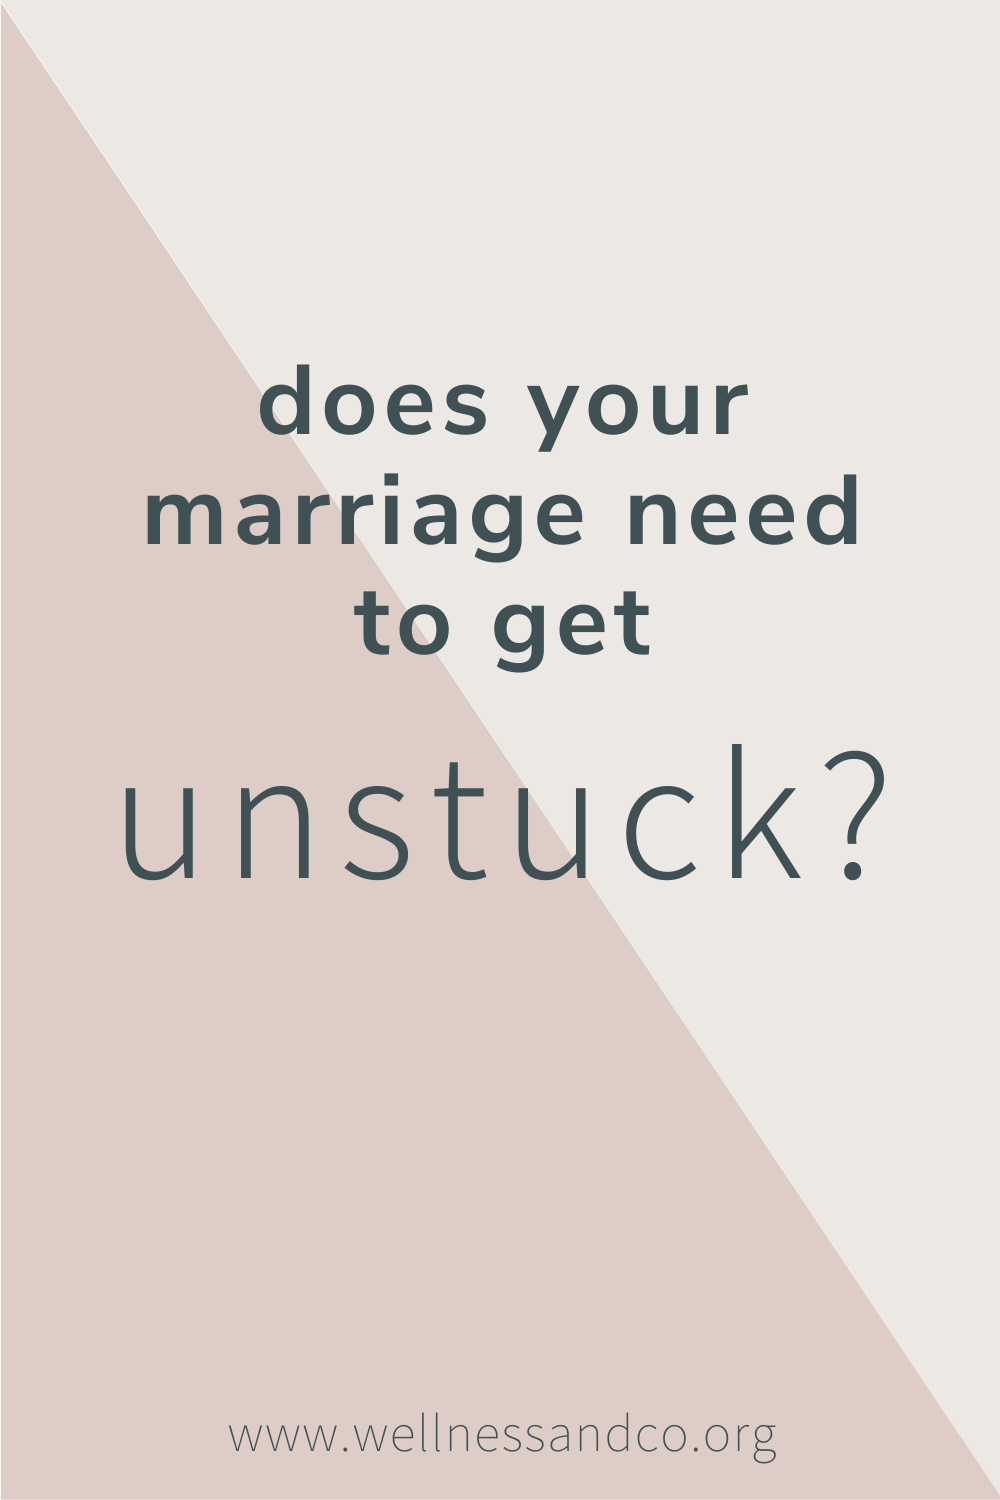 Does Your Marriage Need to Get Unstuck? | What are the three ingredients to a healthy marriage? And, how do we move from stuck to unstuck? This post tells you exactly what's needed to get your marriage back on track and jumpstart healing and closeness, cheers!